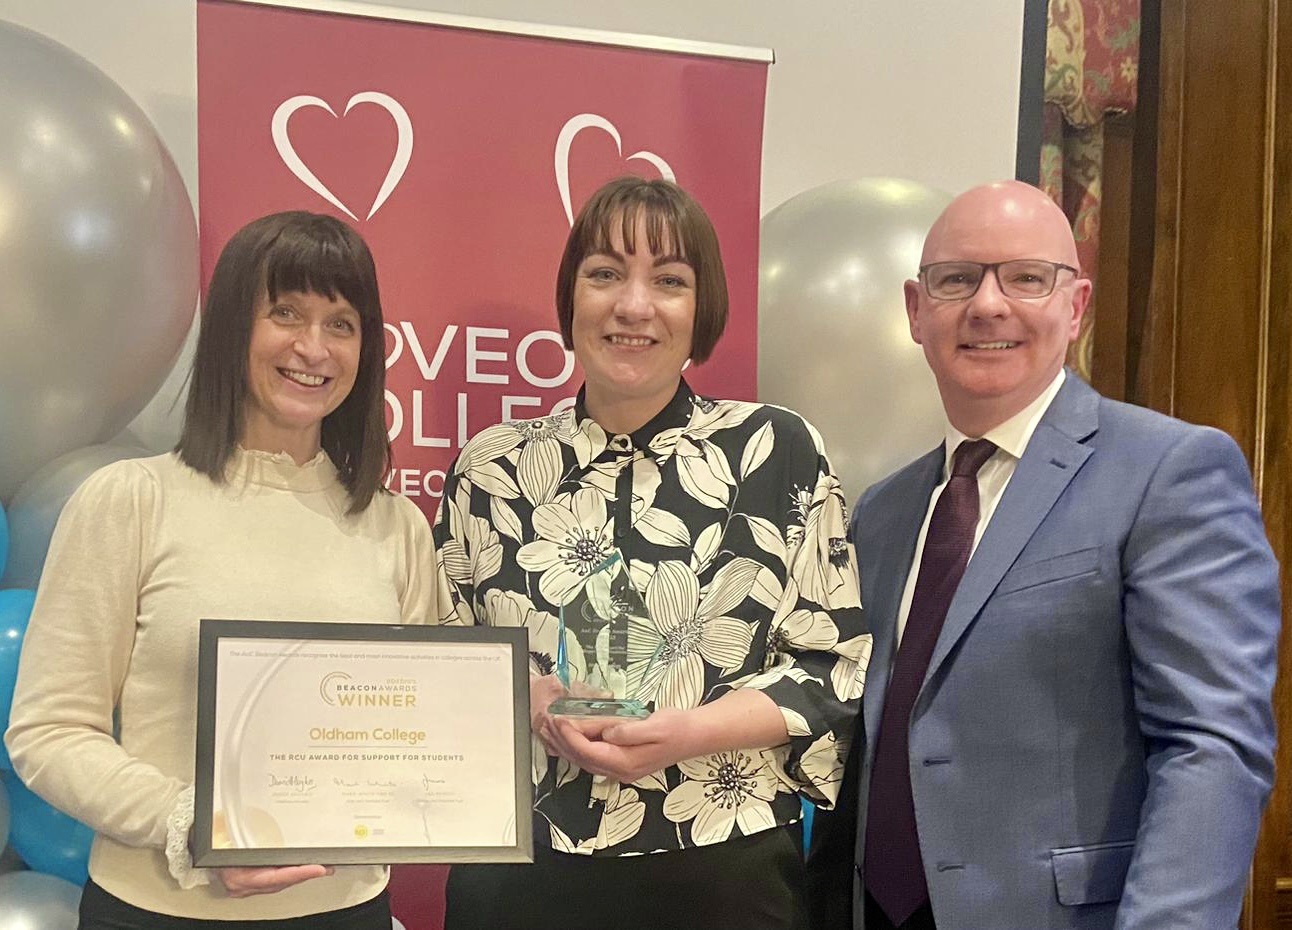 SHINING Lights: Oldham College representatives celebrating winning the prestigious AoC Beacon Award 2023 for Support for Students today: (L-R) Emma Coppinger (Integrated Student Support Manager), Rebecca Hurst (Designated Safeguarding Lead) and Alan Benvie (Vice Principal, Student Experience & Inclusion).